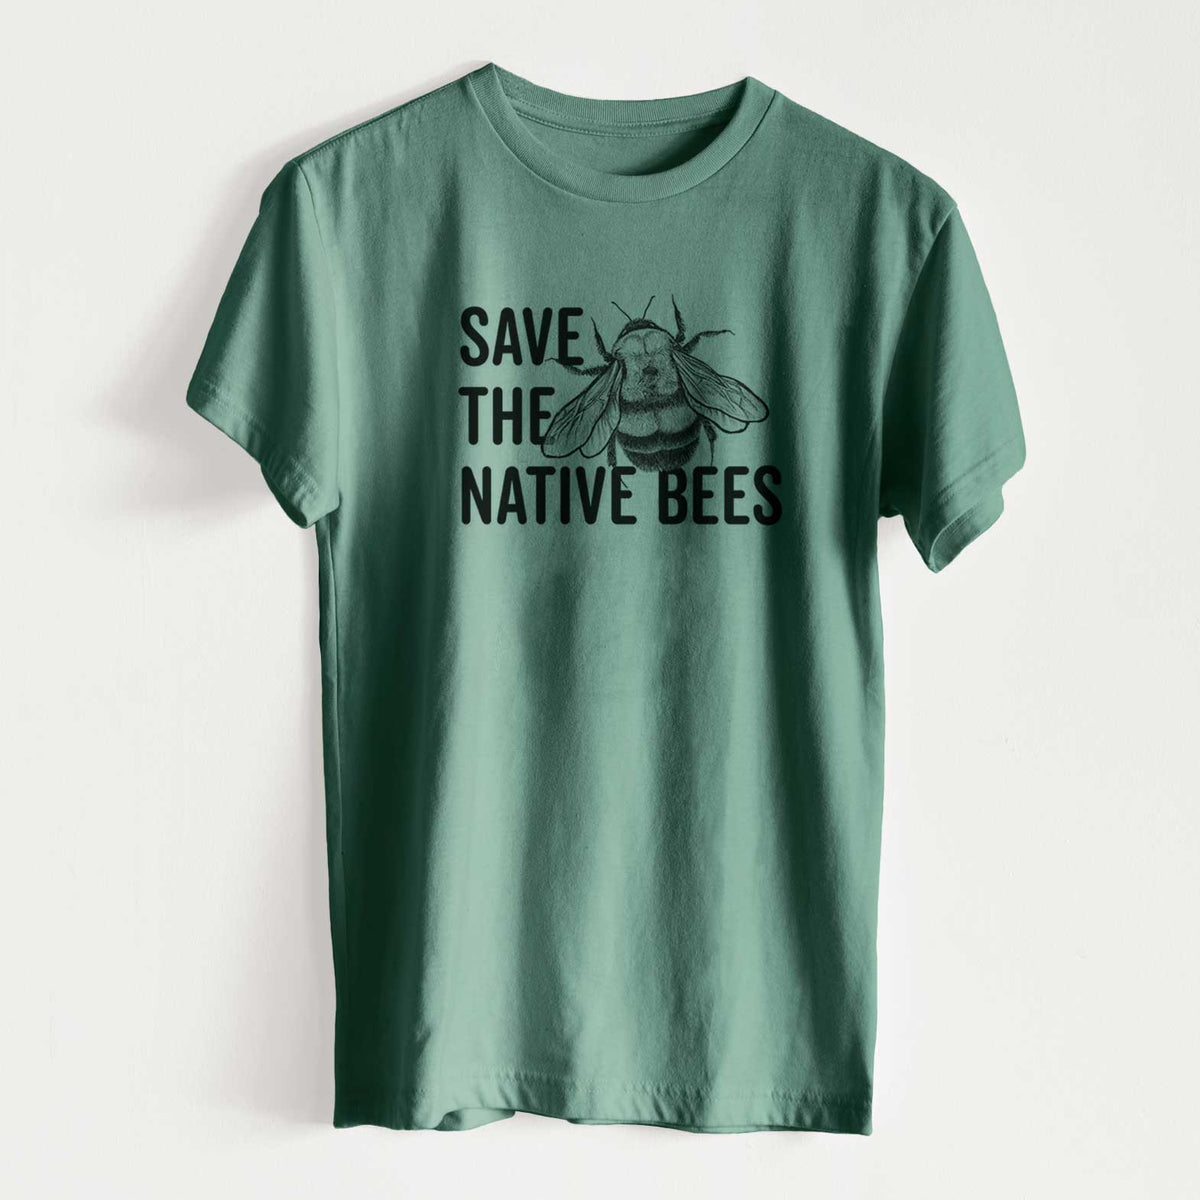 Save the Native Bees - Unisex Recycled Eco Tee  - CLOSEOUT - FINAL SALE